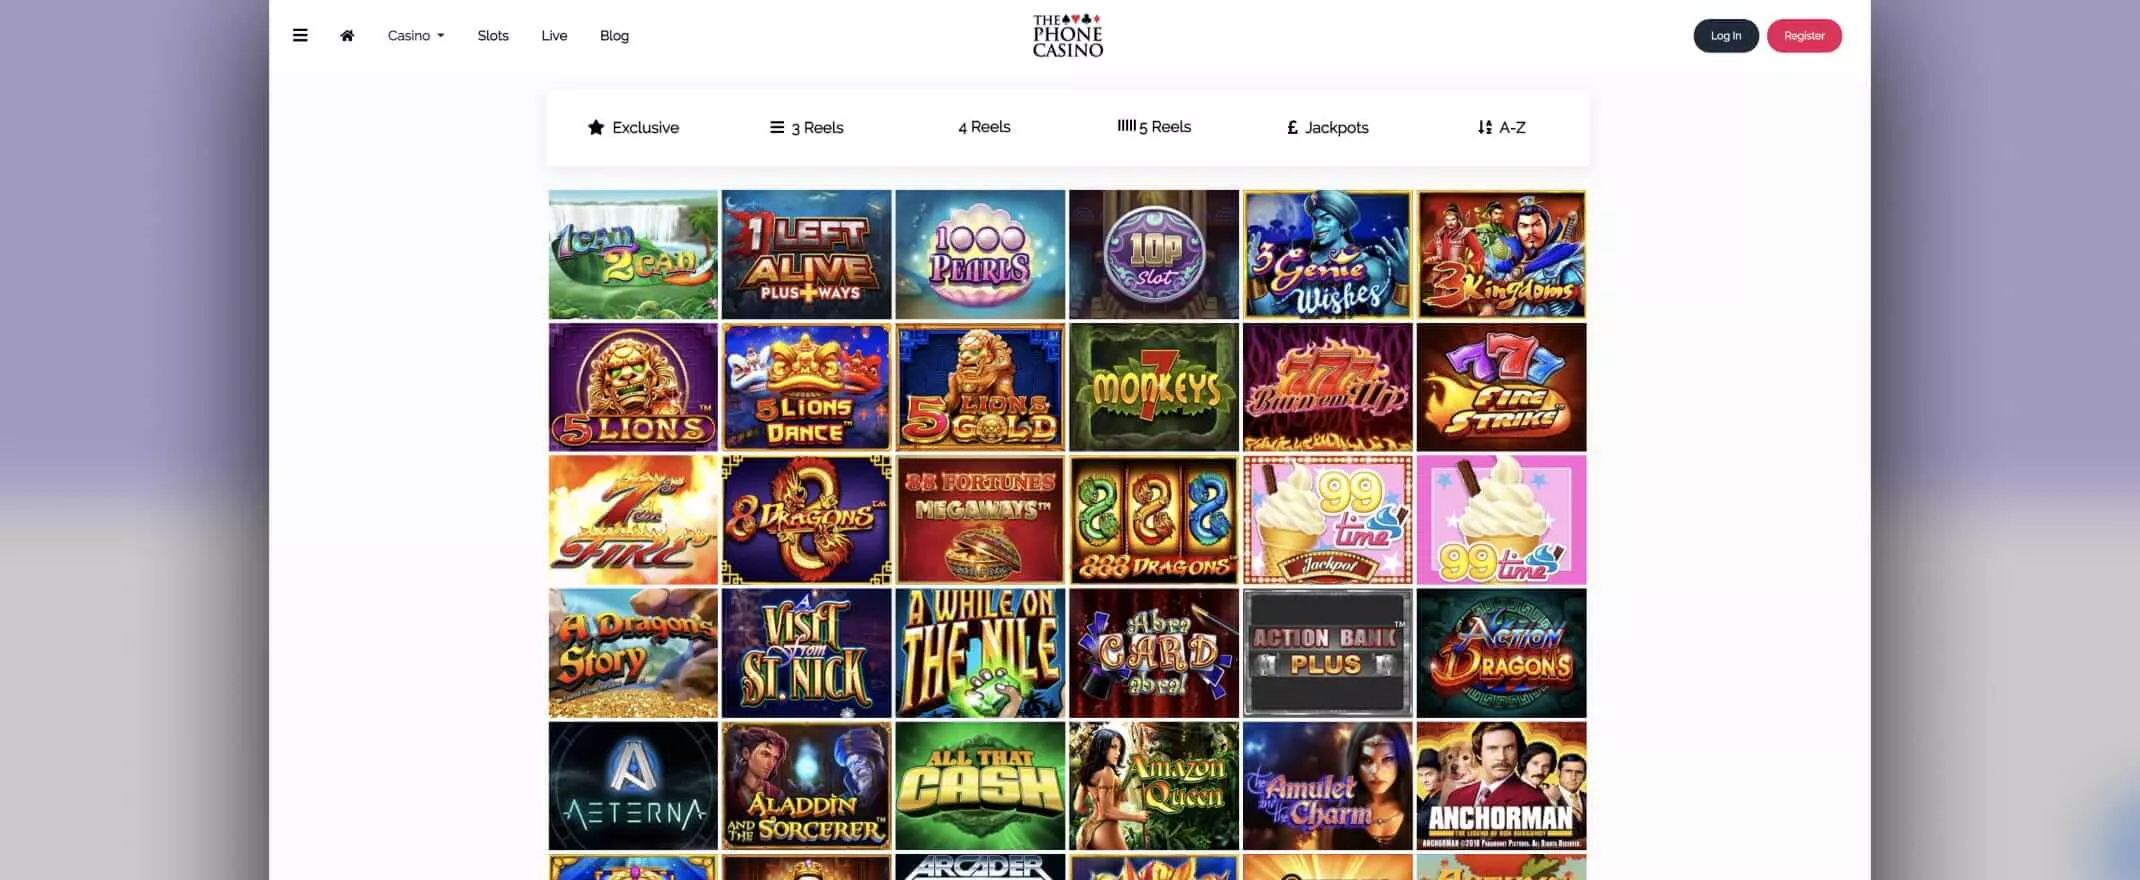 The Phone Casino screenshot of the games page